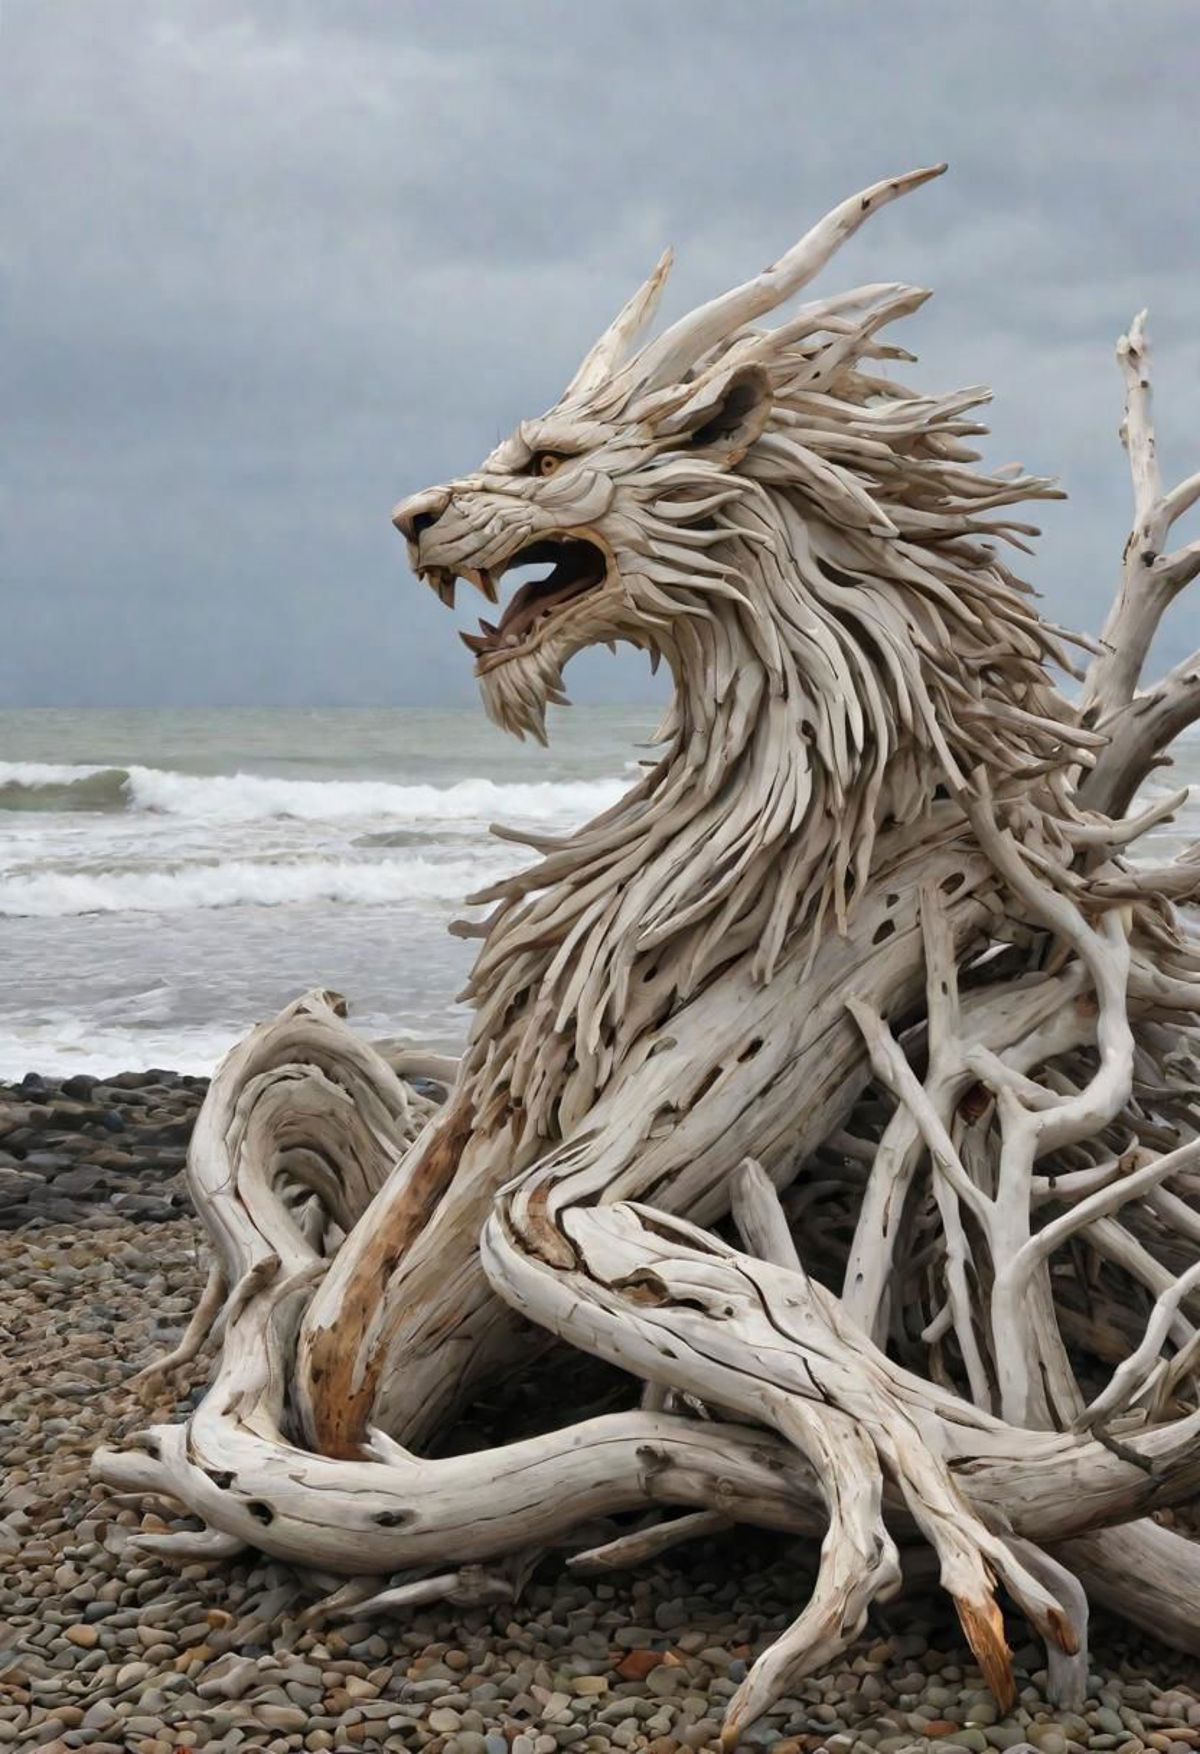 A large wooden lion sculpture sits on a pile of rocks near the ocean.